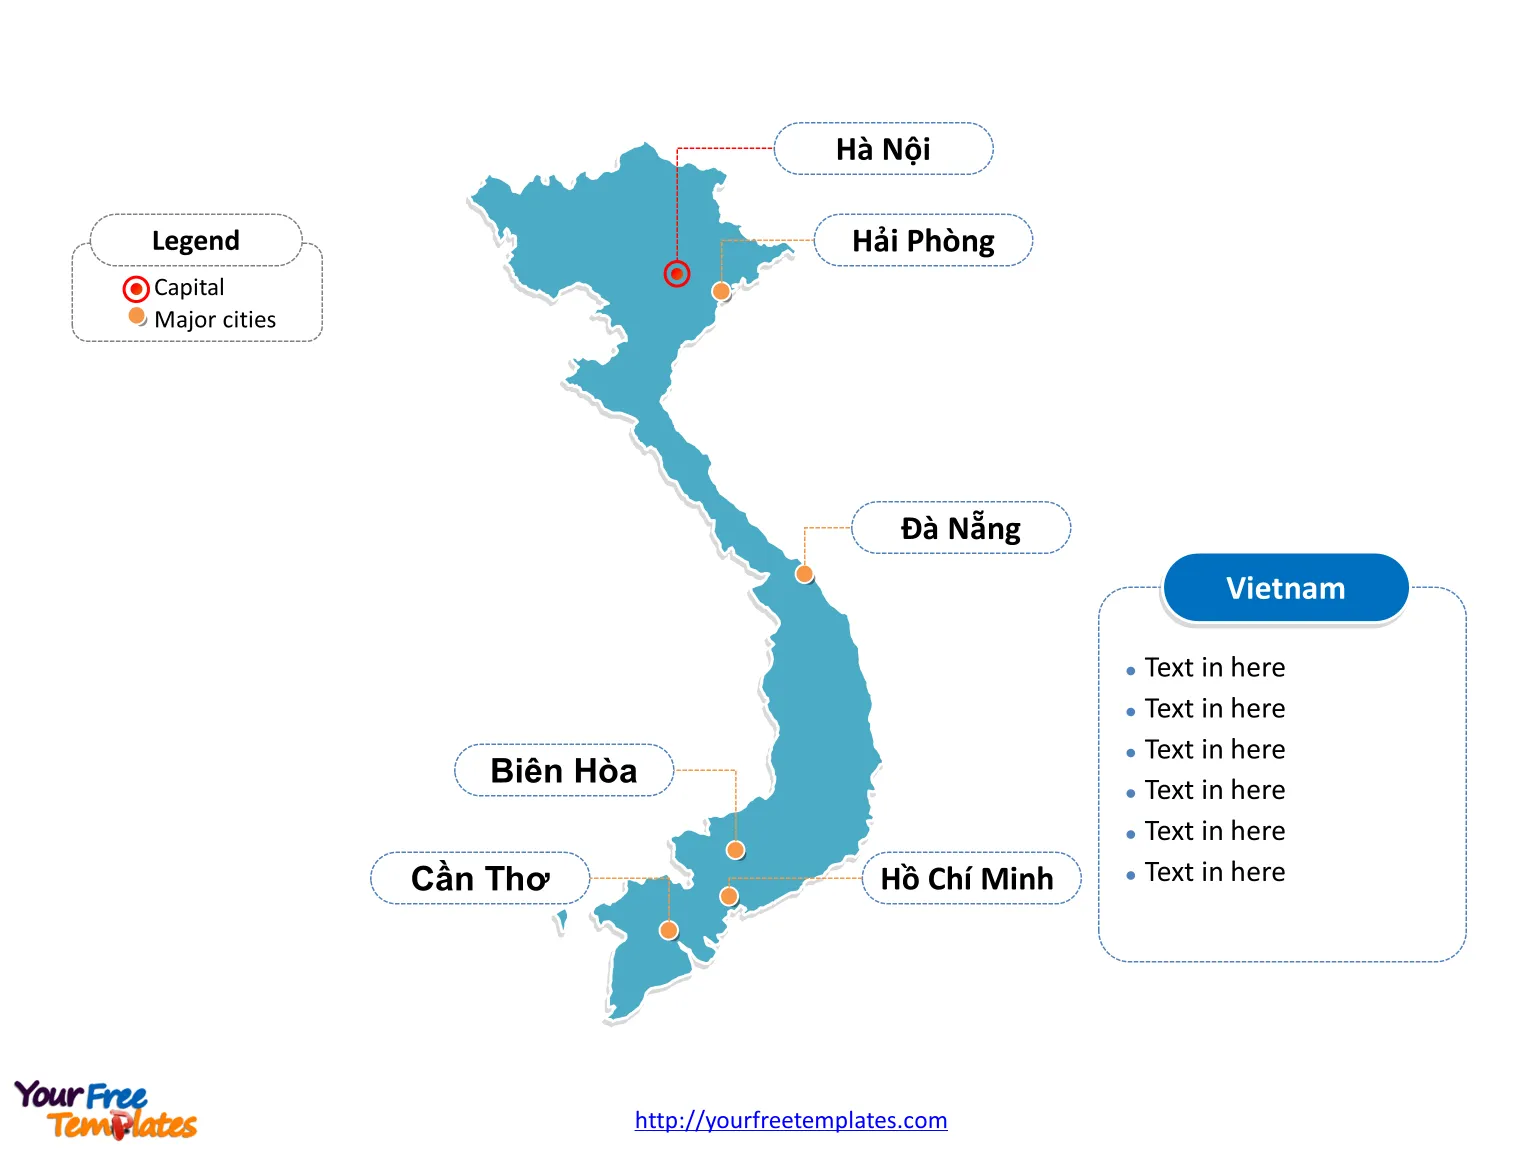 Vietnam editable map of outline labeled with cities